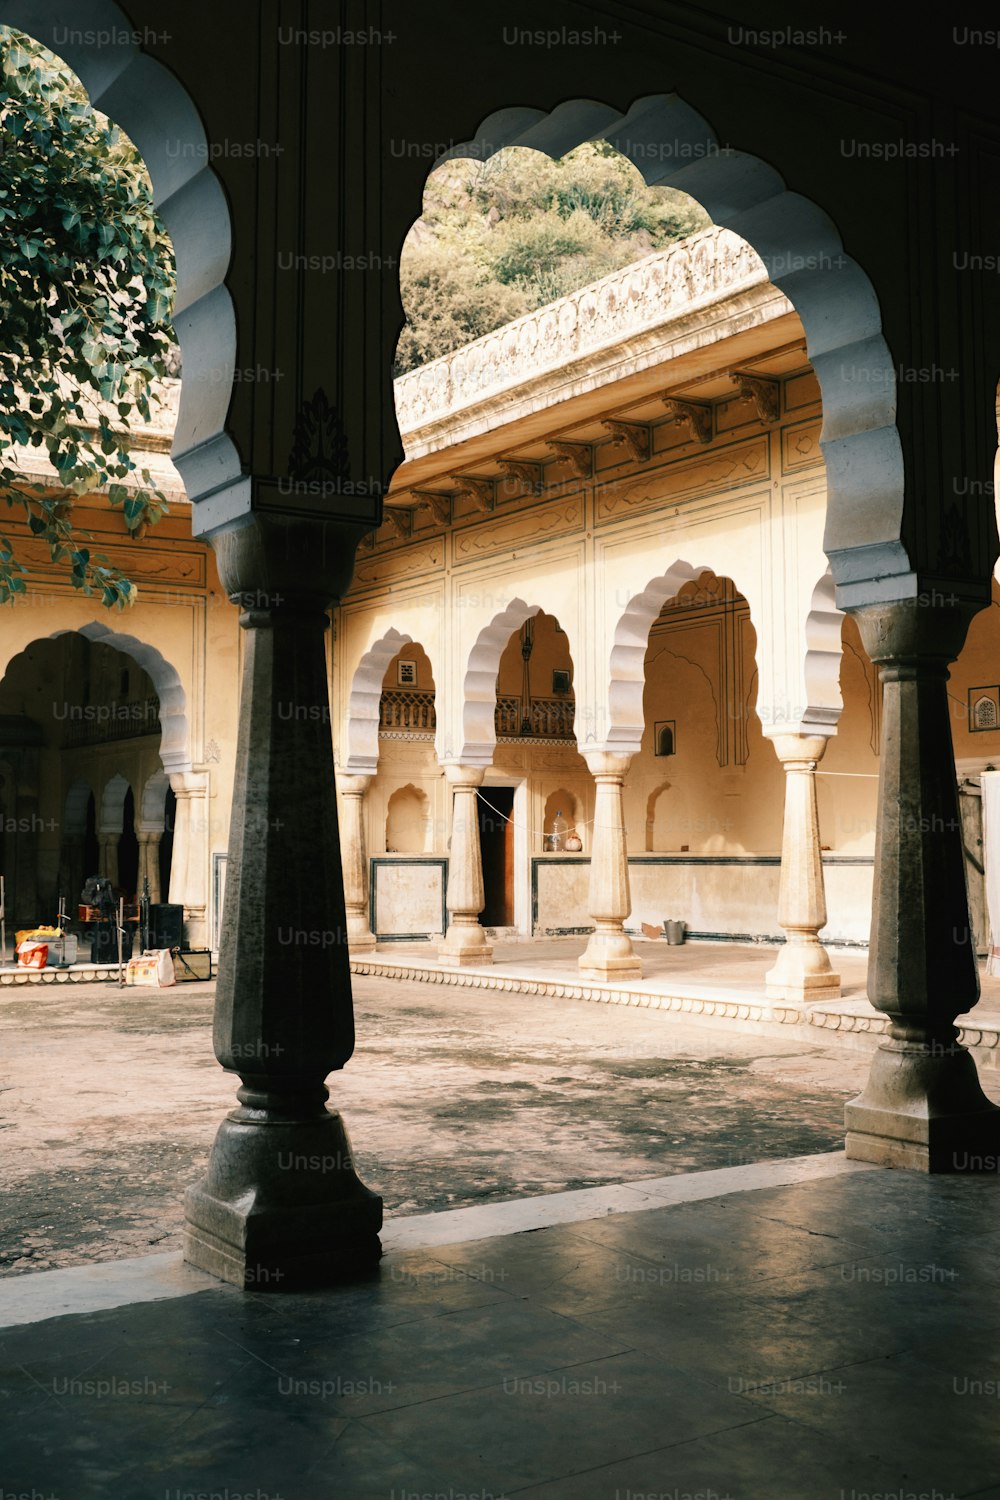 a building with arches and pillars in a courtyard